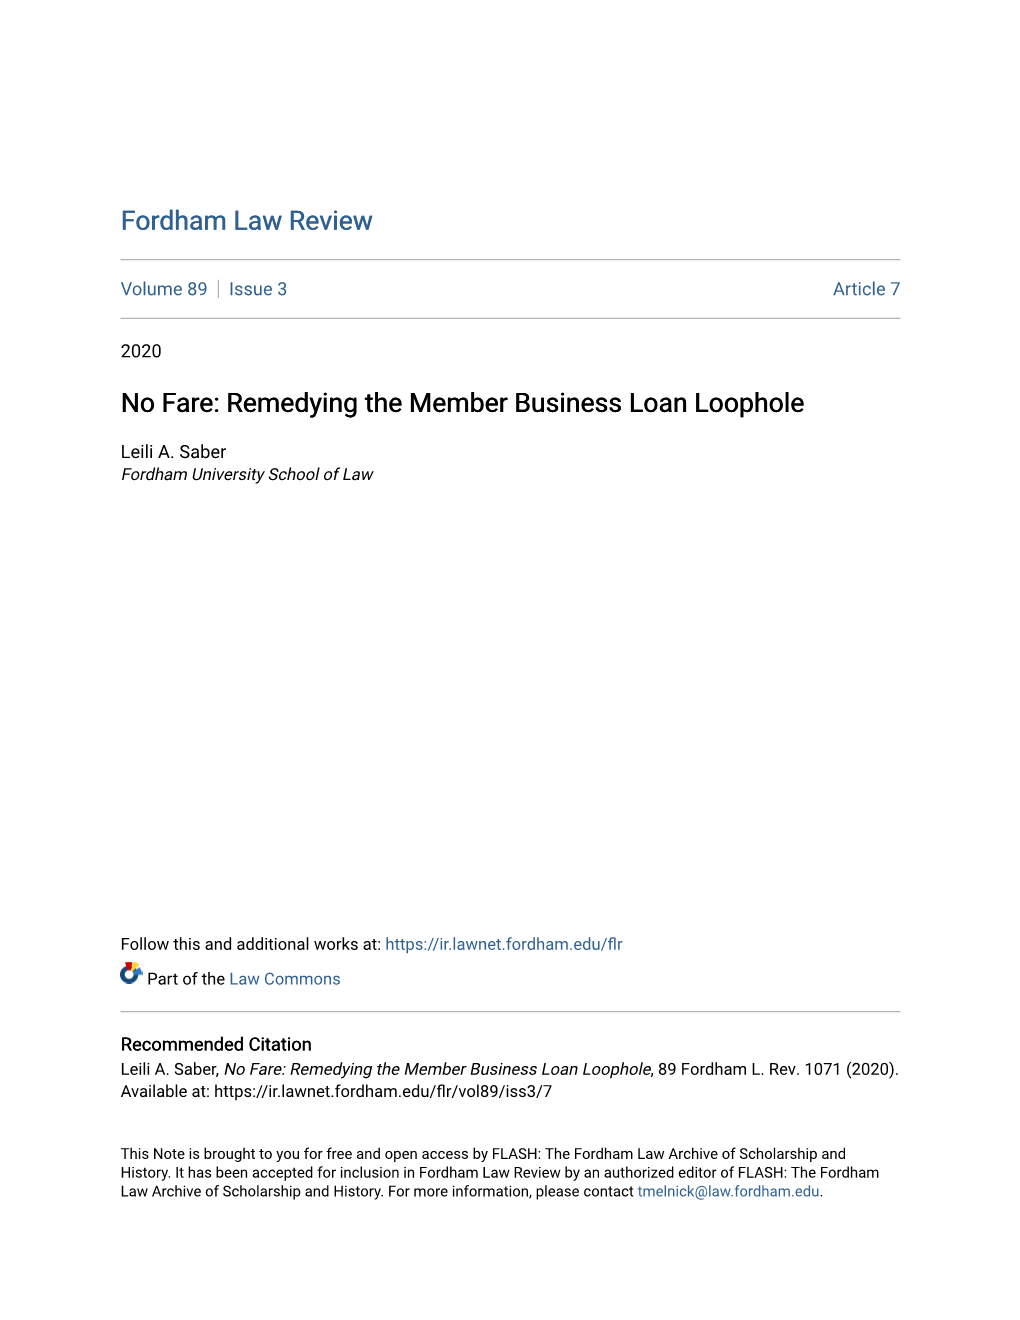 No Fare: Remedying the Member Business Loan Loophole